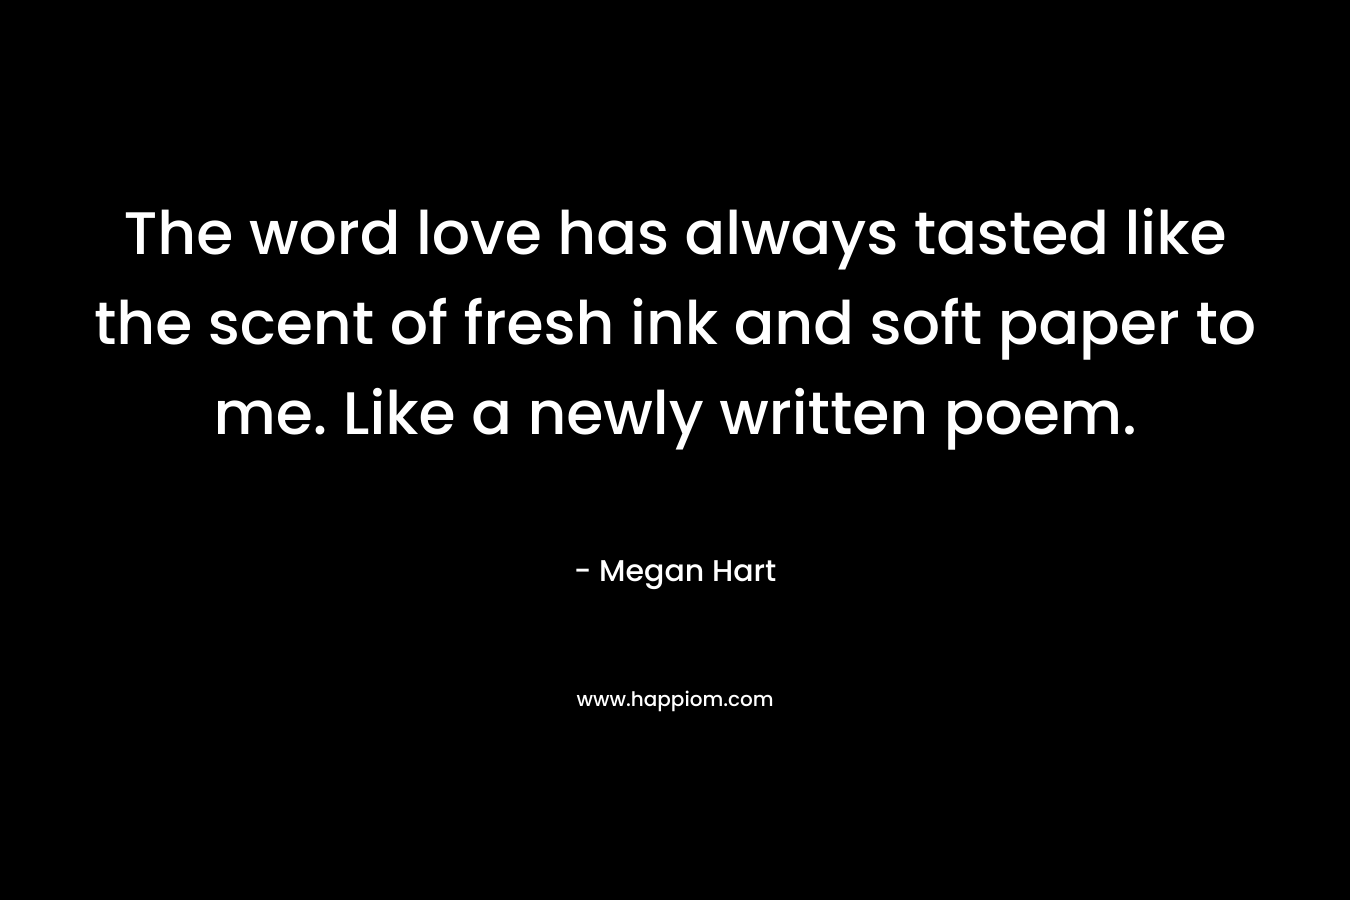 The word love has always tasted like the scent of fresh ink and soft paper to me. Like a newly written poem.